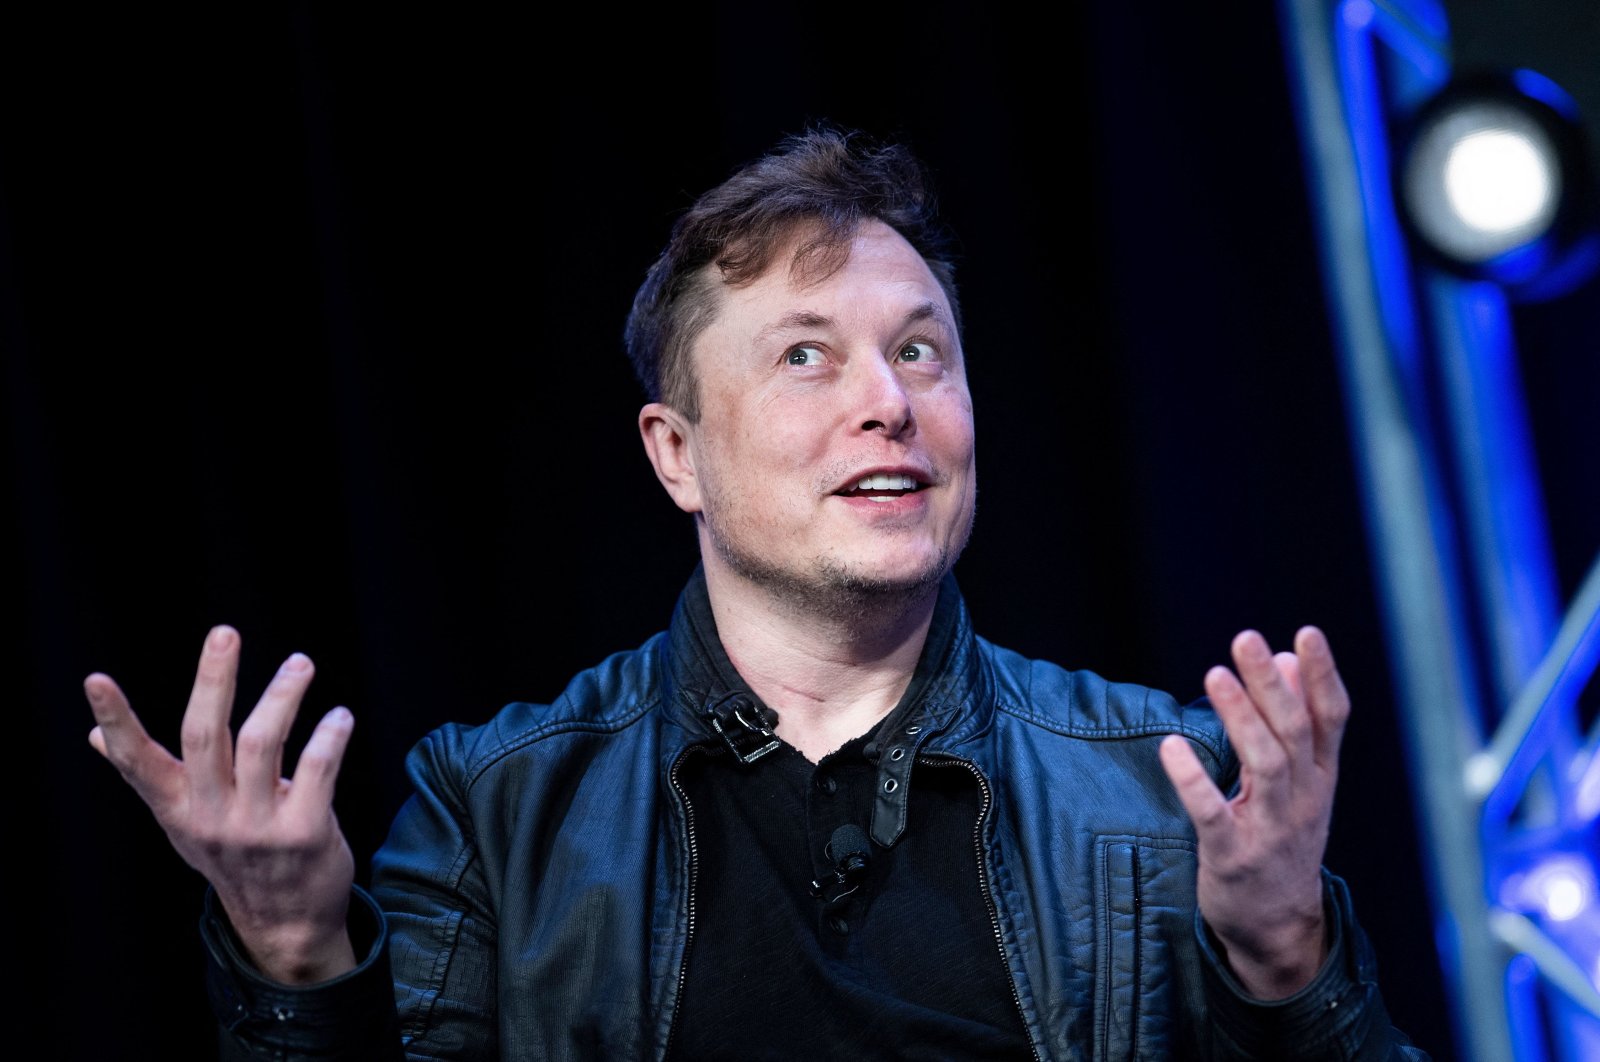 Elon Musk, founder of SpaceX, speaks during the Satellite 2020 at the Washington Convention Center in Washington, U.S., March 9, 2020. (AFP Photo)